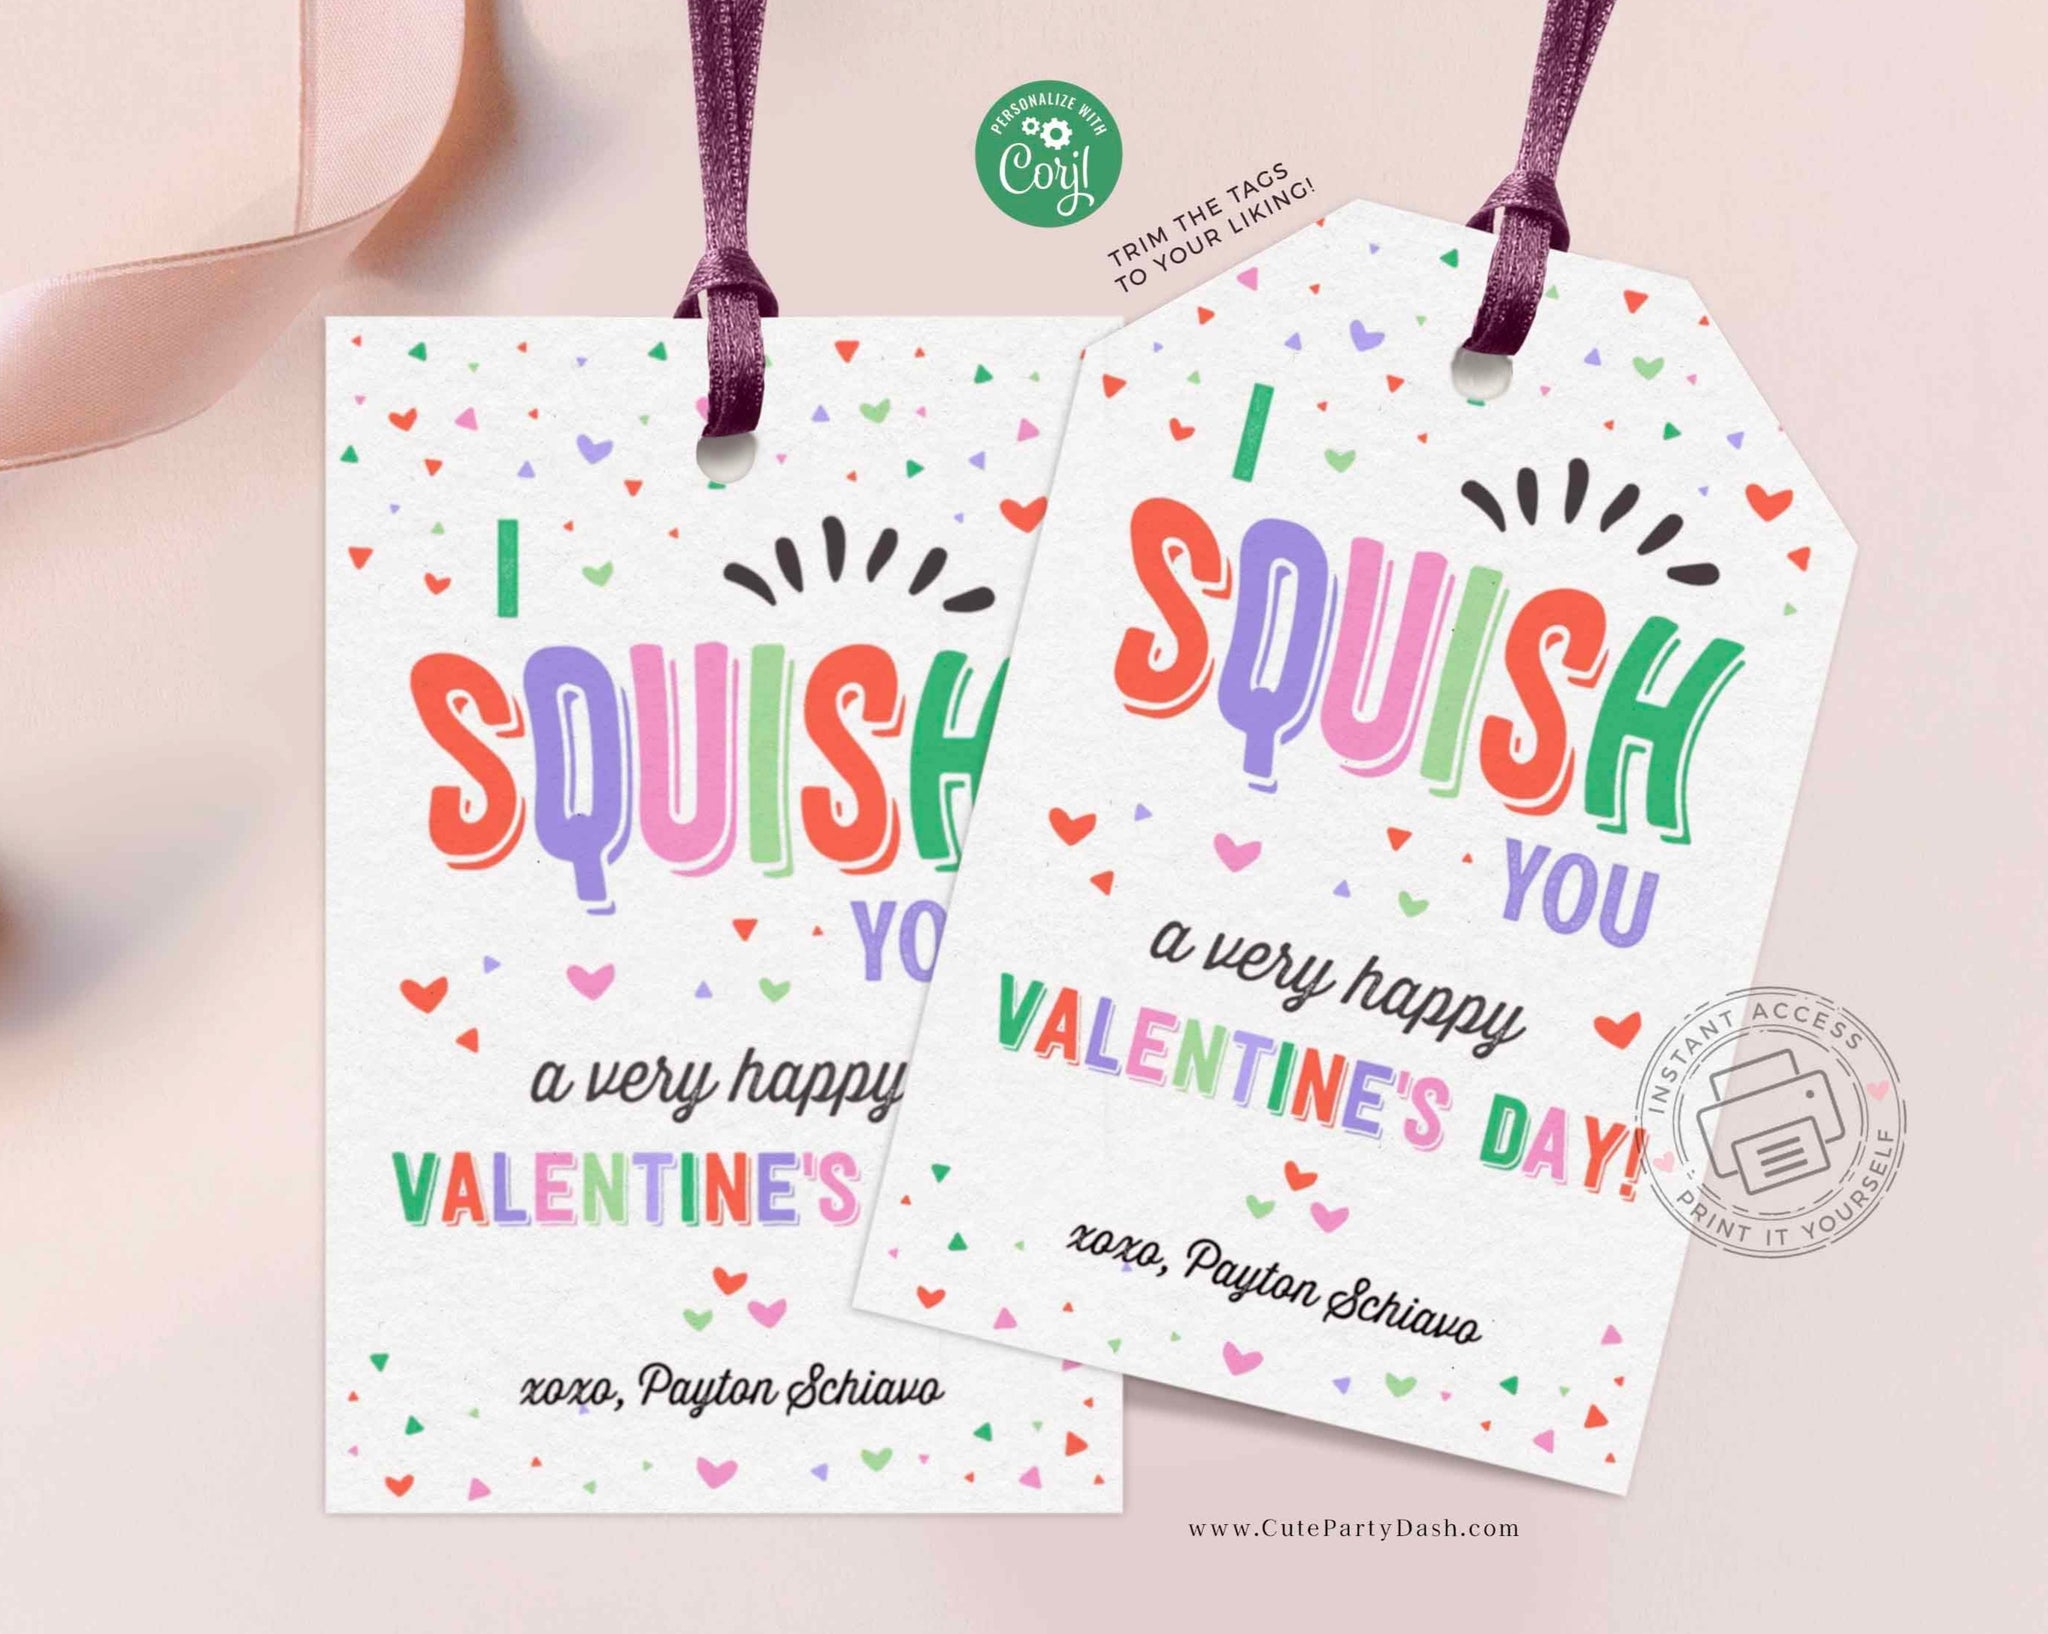 I Squish You a Happy Valentine's Day Treat Tag, Non-Candy Squishy Toy Valentine gift tag - Instant Download